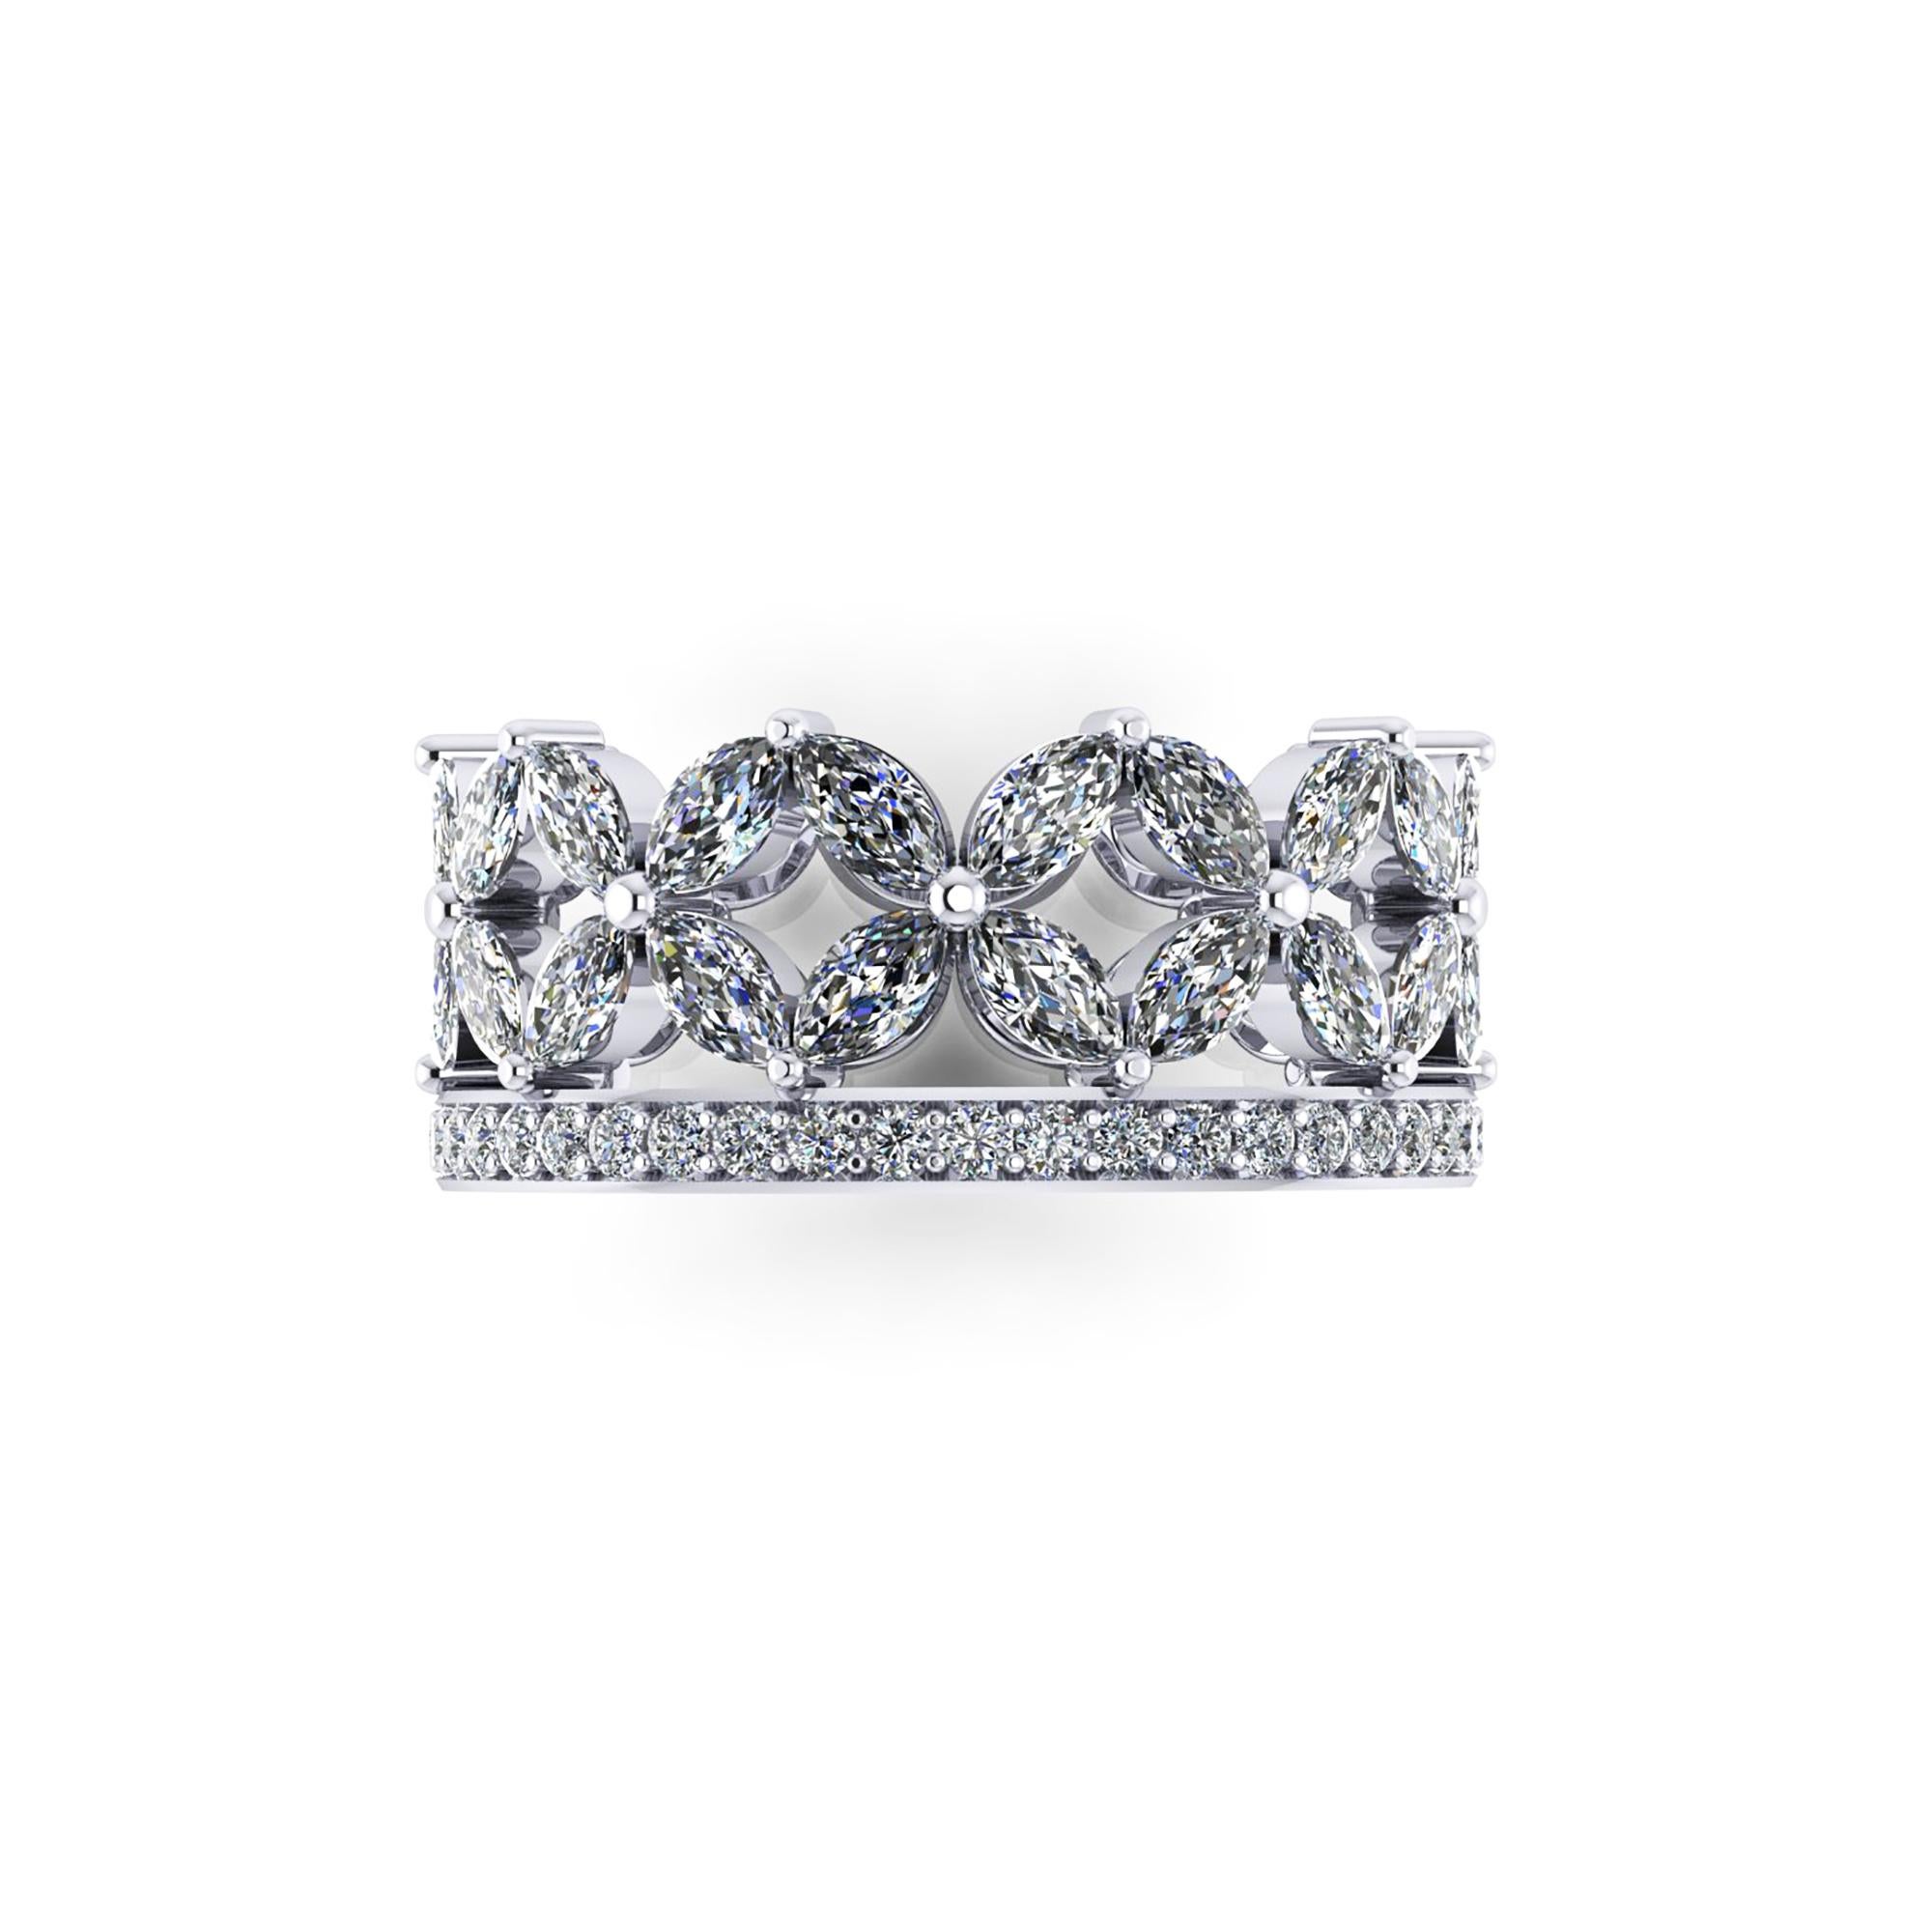  2.15 carat sparkly white diamonds, Marquise Diamond cut and Round brilliant cut,  G/H color, VS clarity,  for a total carat weight of 2.15 carat, hand set in this hand made Flower eternity, wide band, entirely made in Platinum 950, refined and